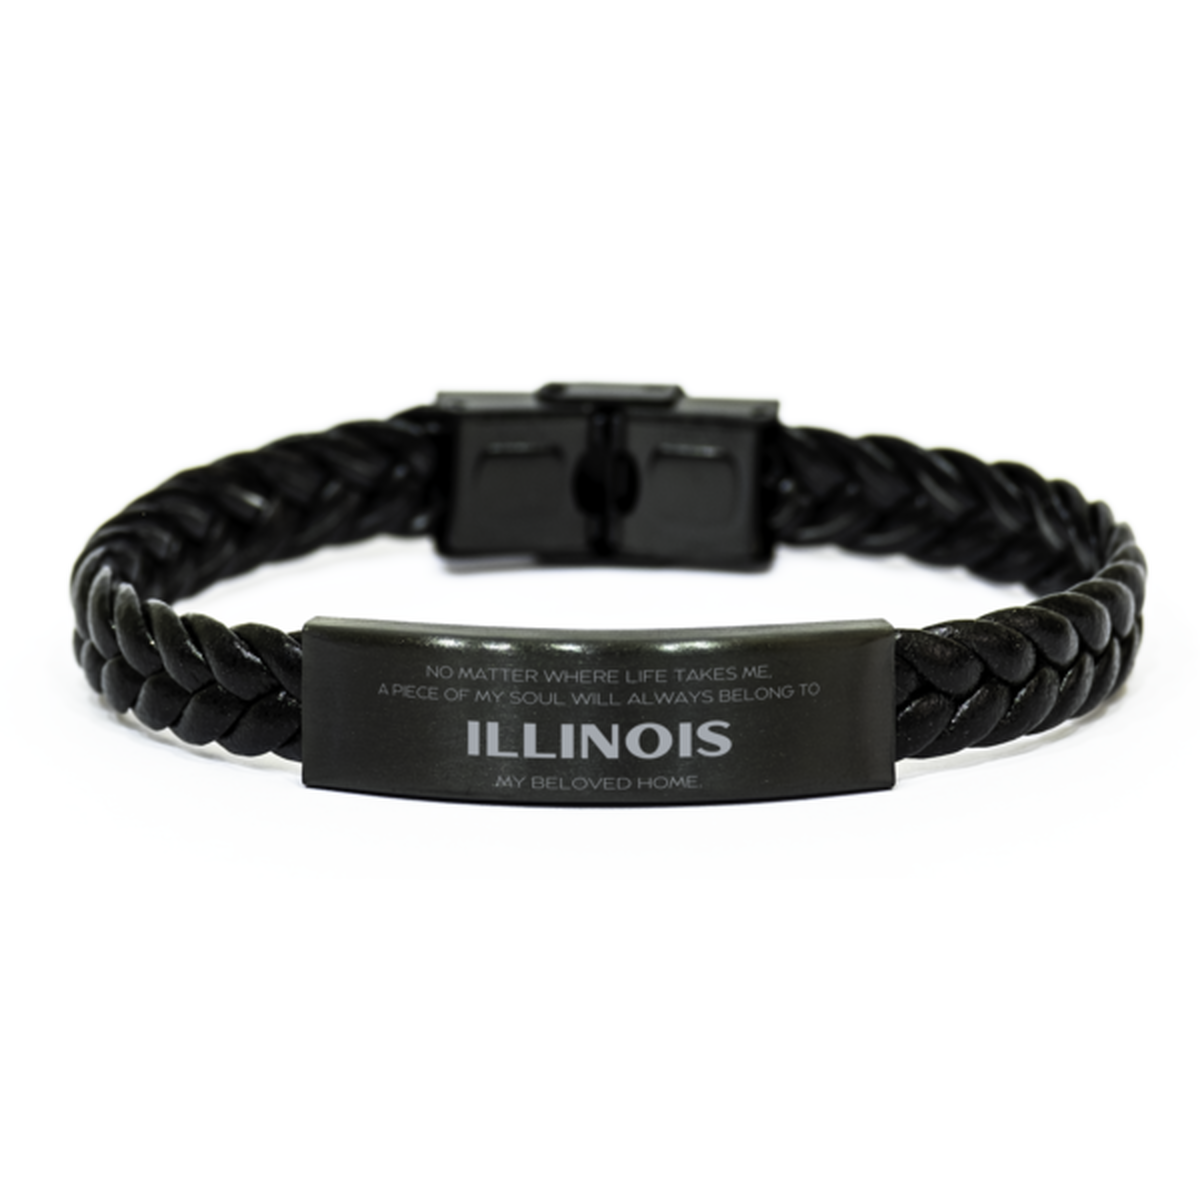 Love Illinois State Gifts, My soul will always belong to Illinois, Proud Braided Leather Bracelet, Birthday Unique Gifts For Illinois Men, Women, Friends